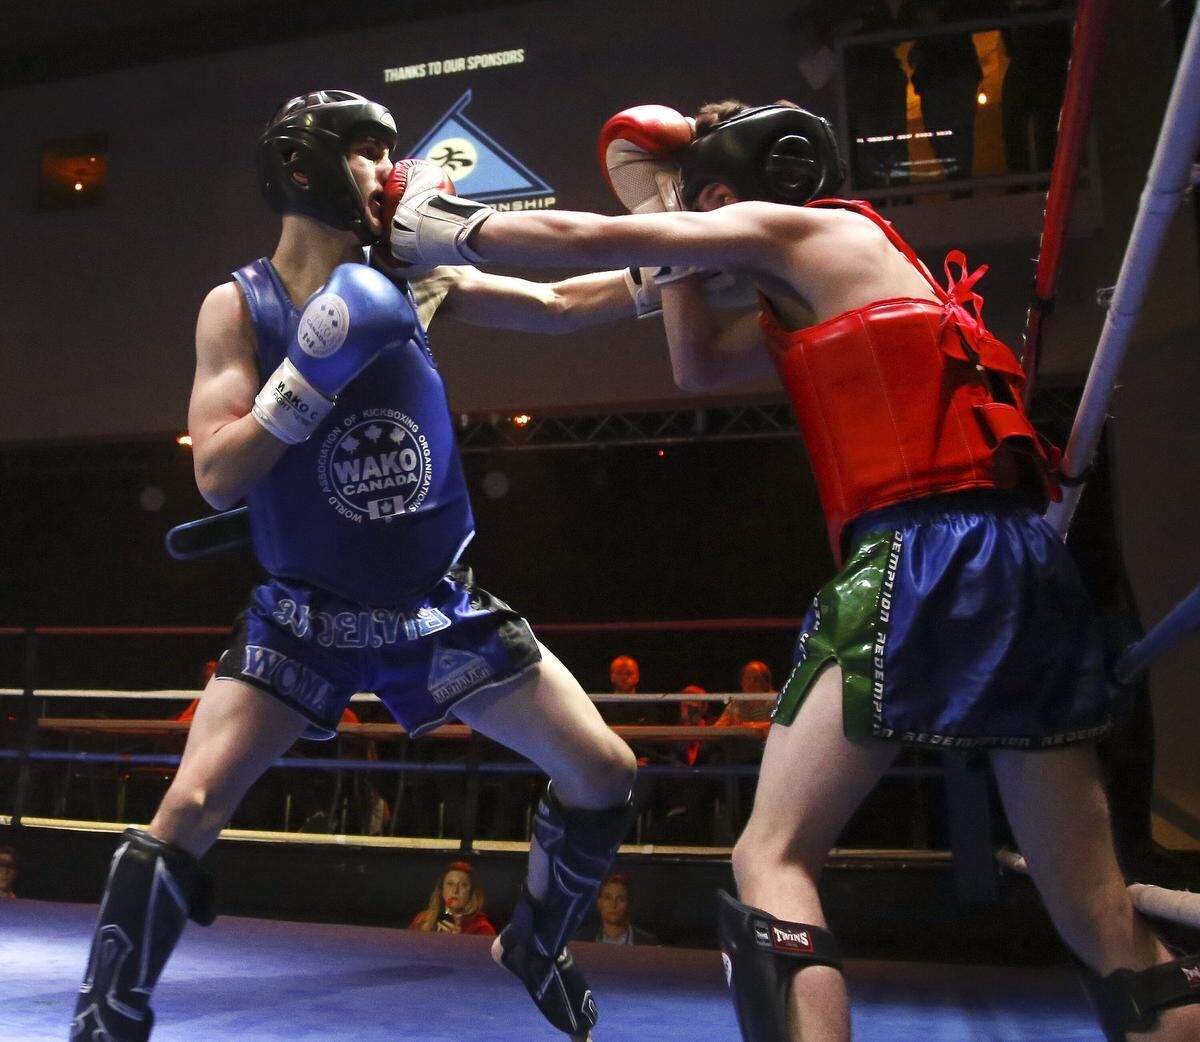 Peterborough crowd roars for young kick-boxers in final round